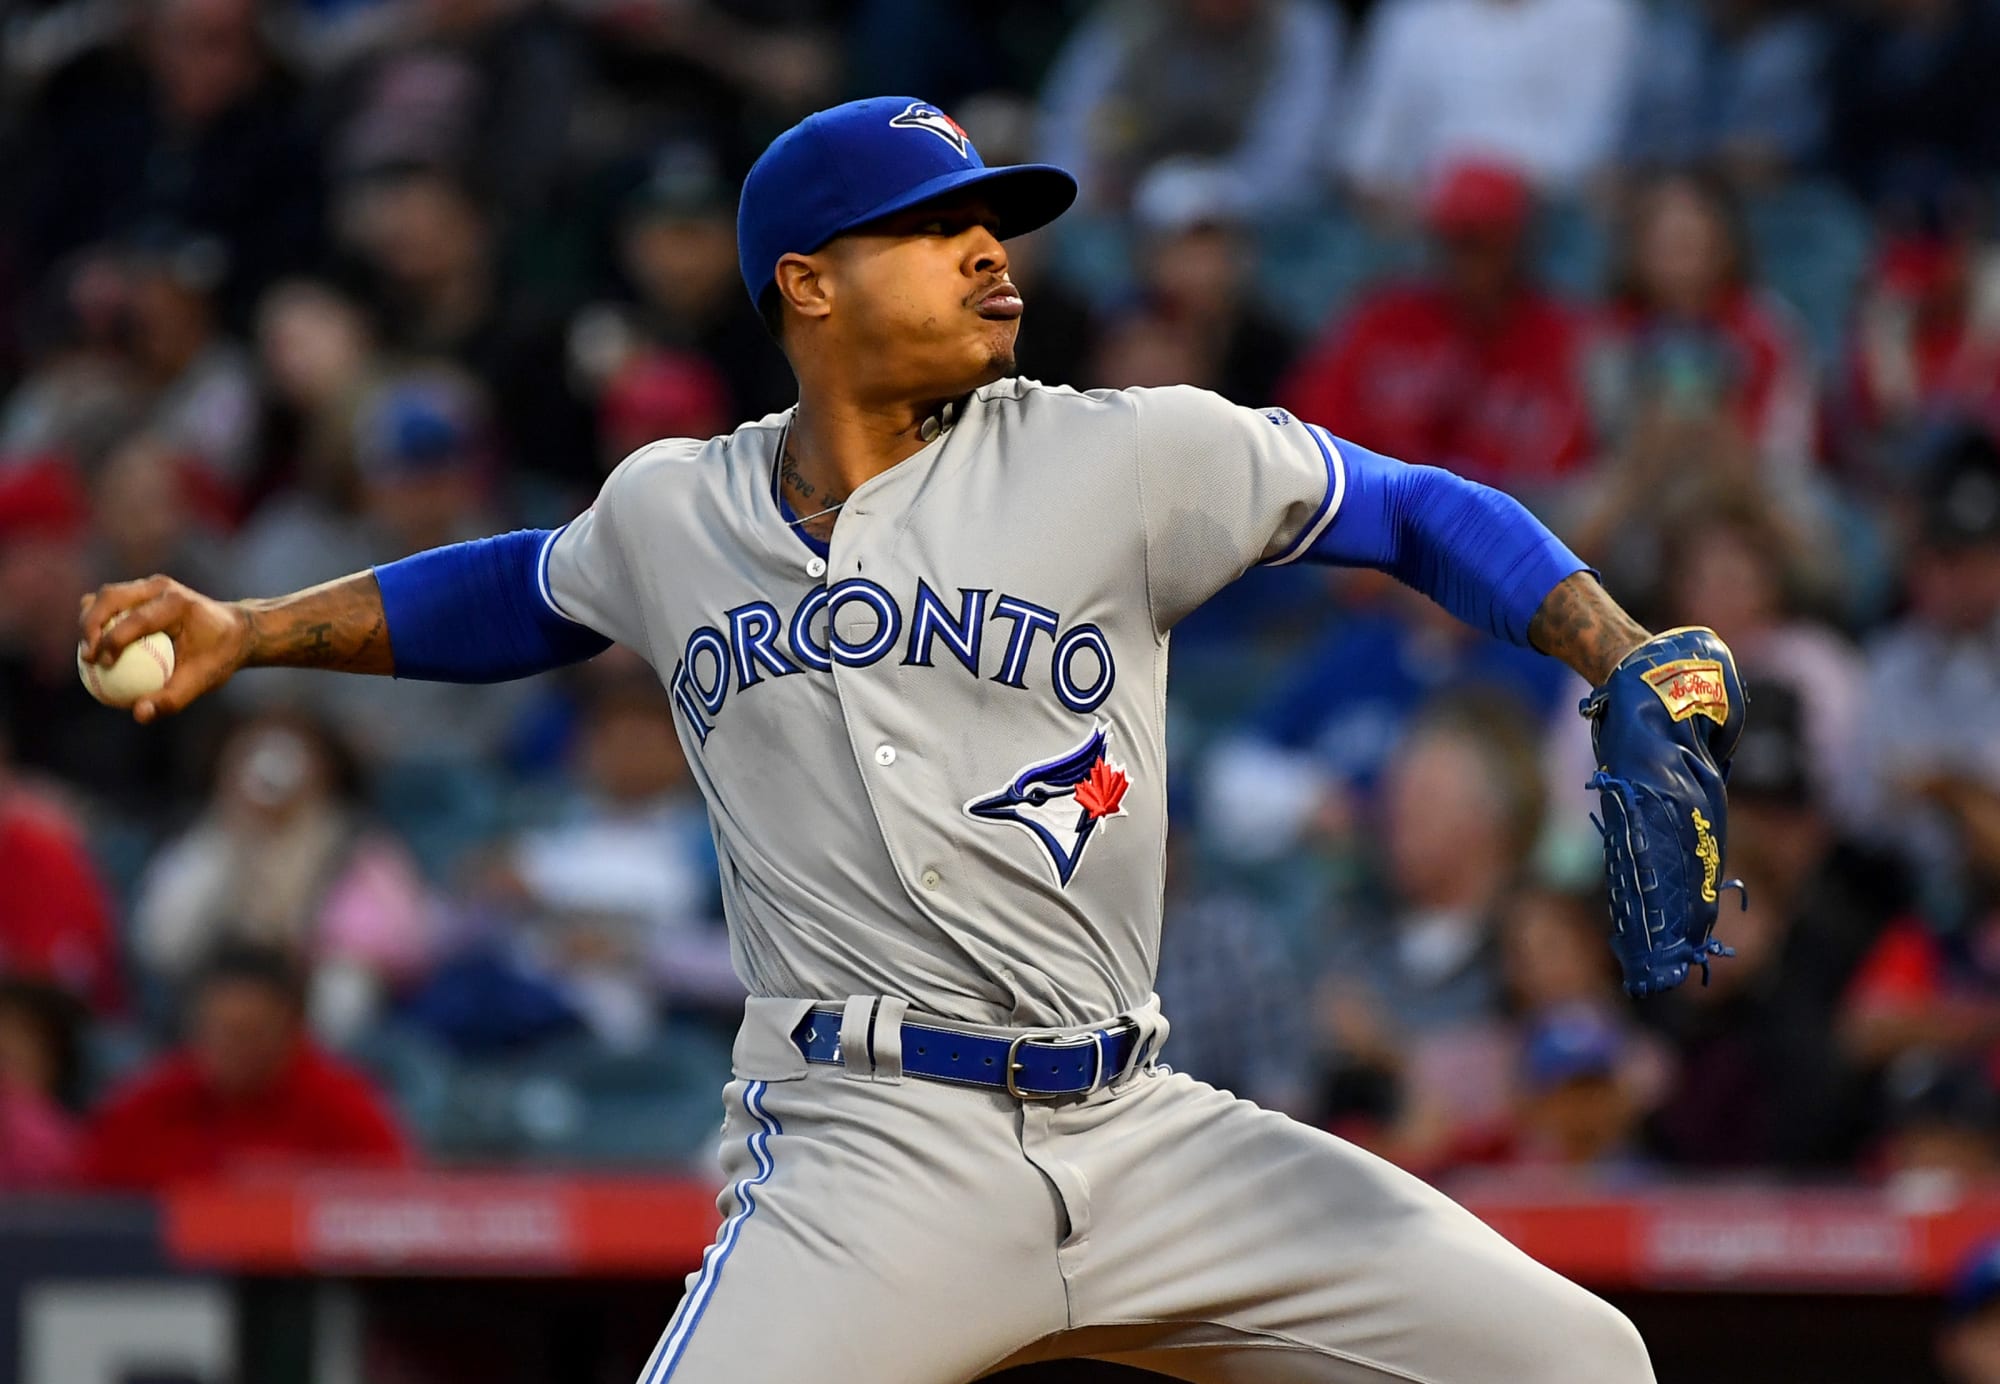 St. Louis Cardinals: Matching up the Cards and Blue Jays for a trade